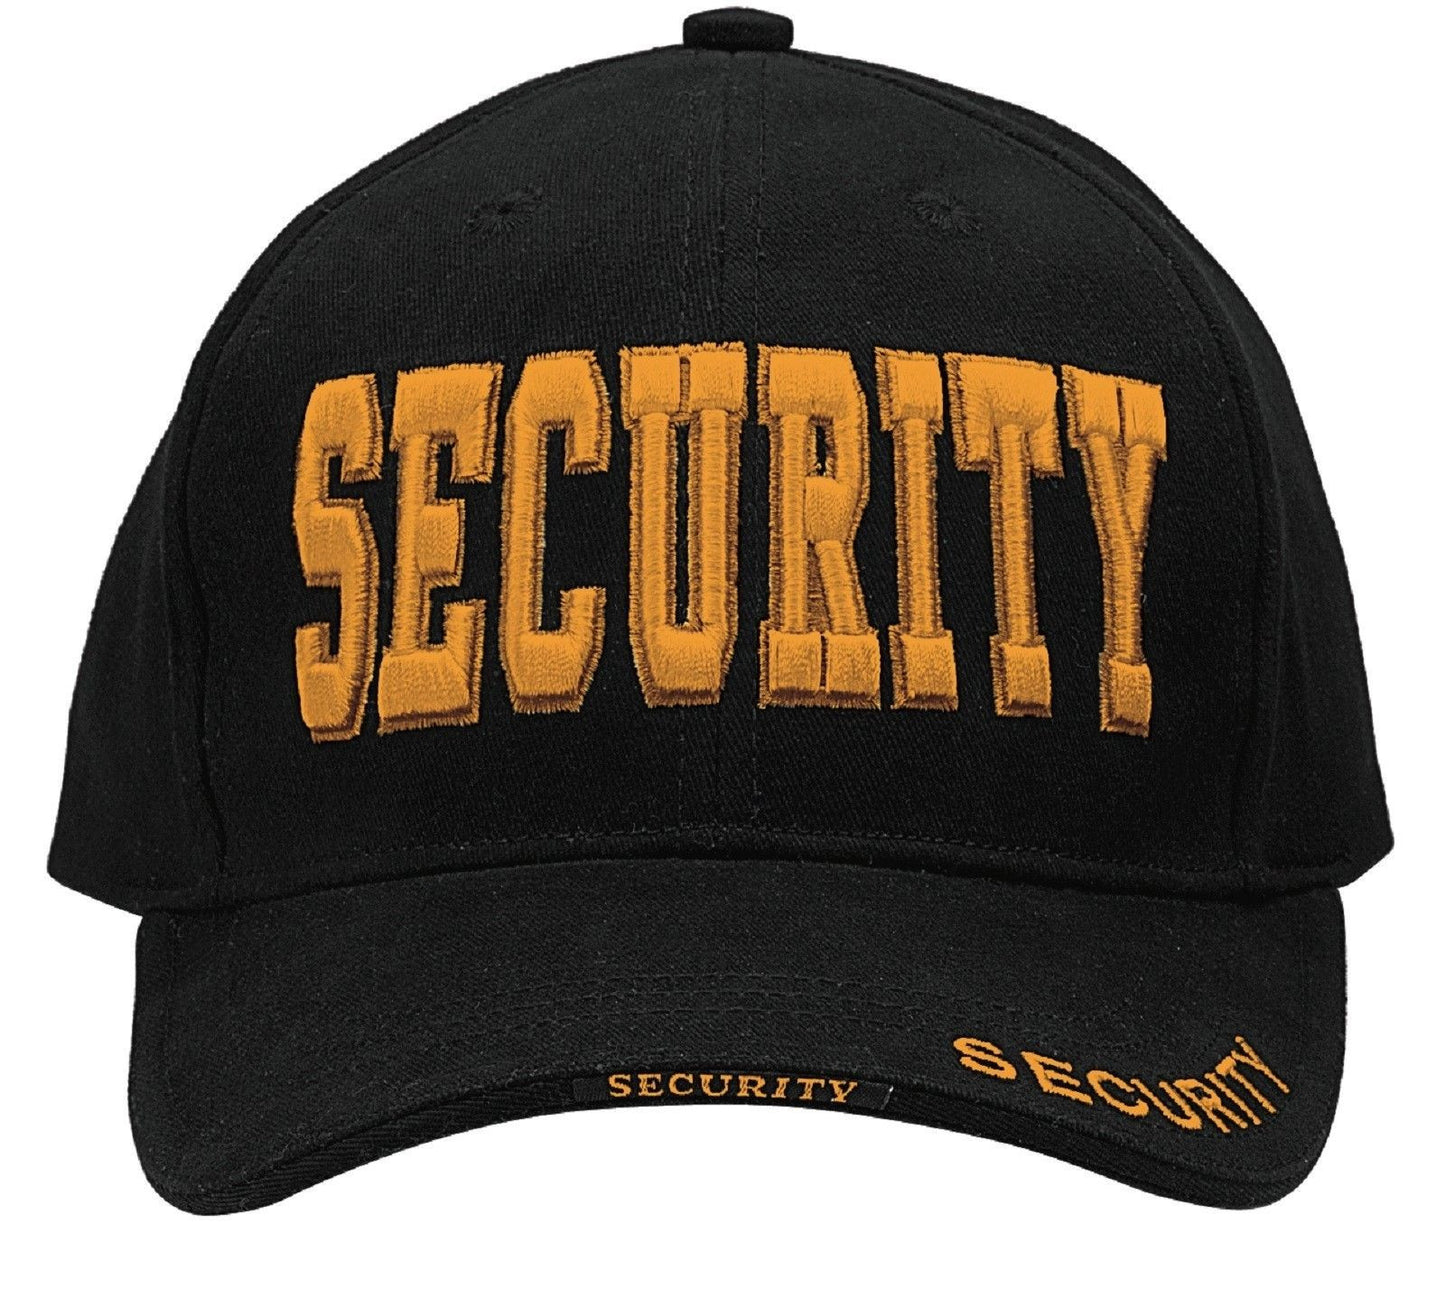 Black Cap With Gold "Security" - Deluxe Low Profile Baseball Hat